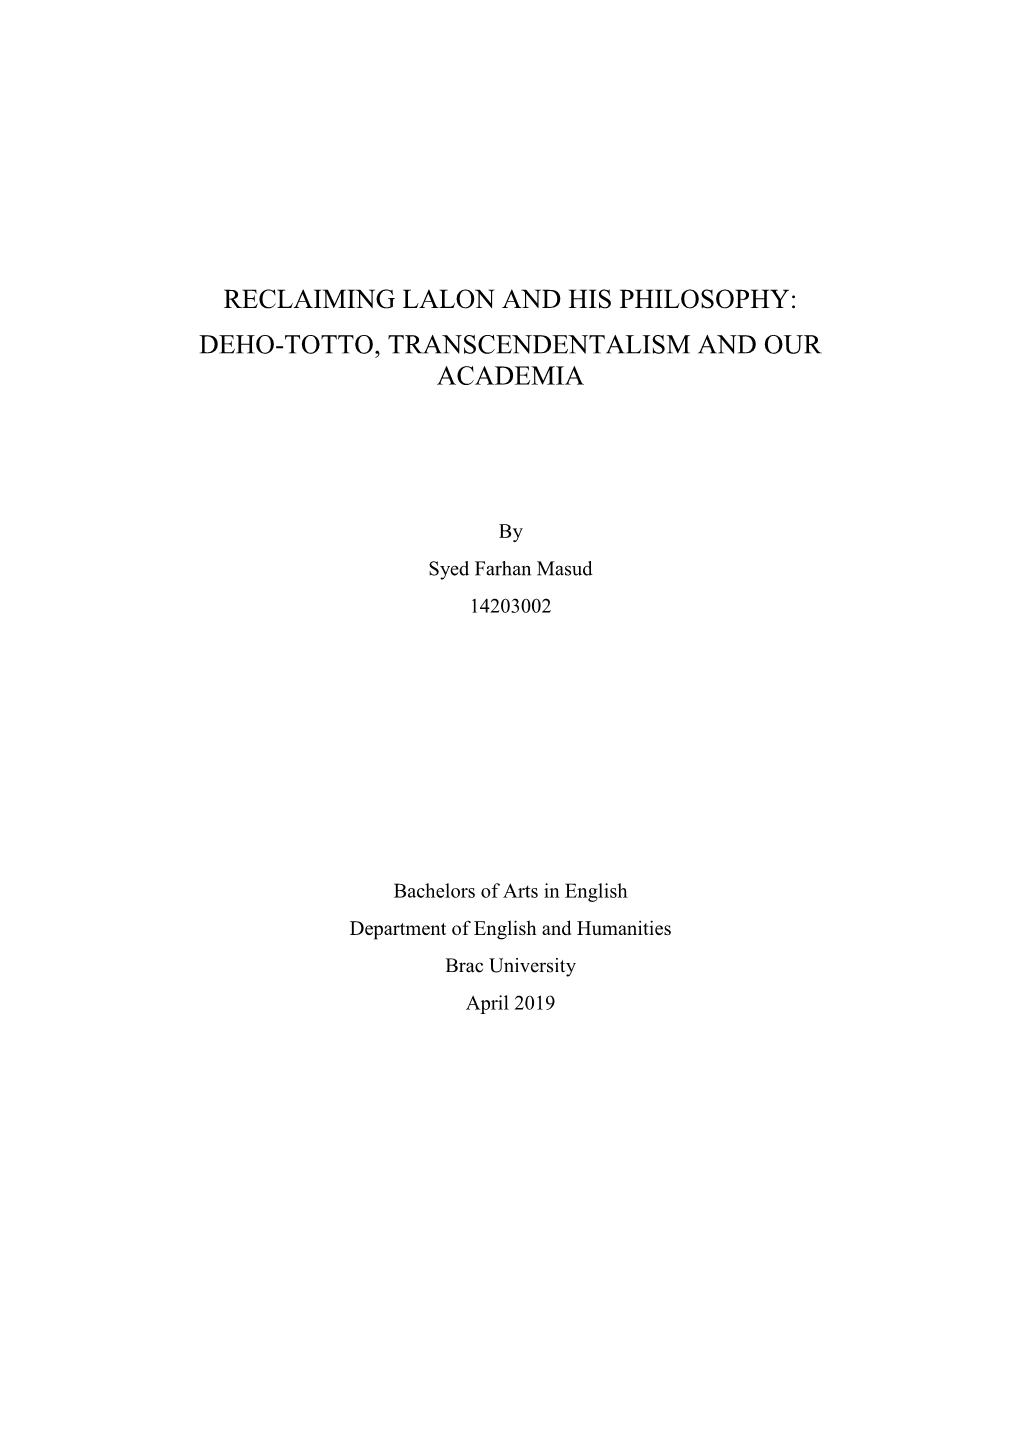 Reclaiming Lalon and His Philosophy: Deho-Totto, Transcendentalism and Our Academia